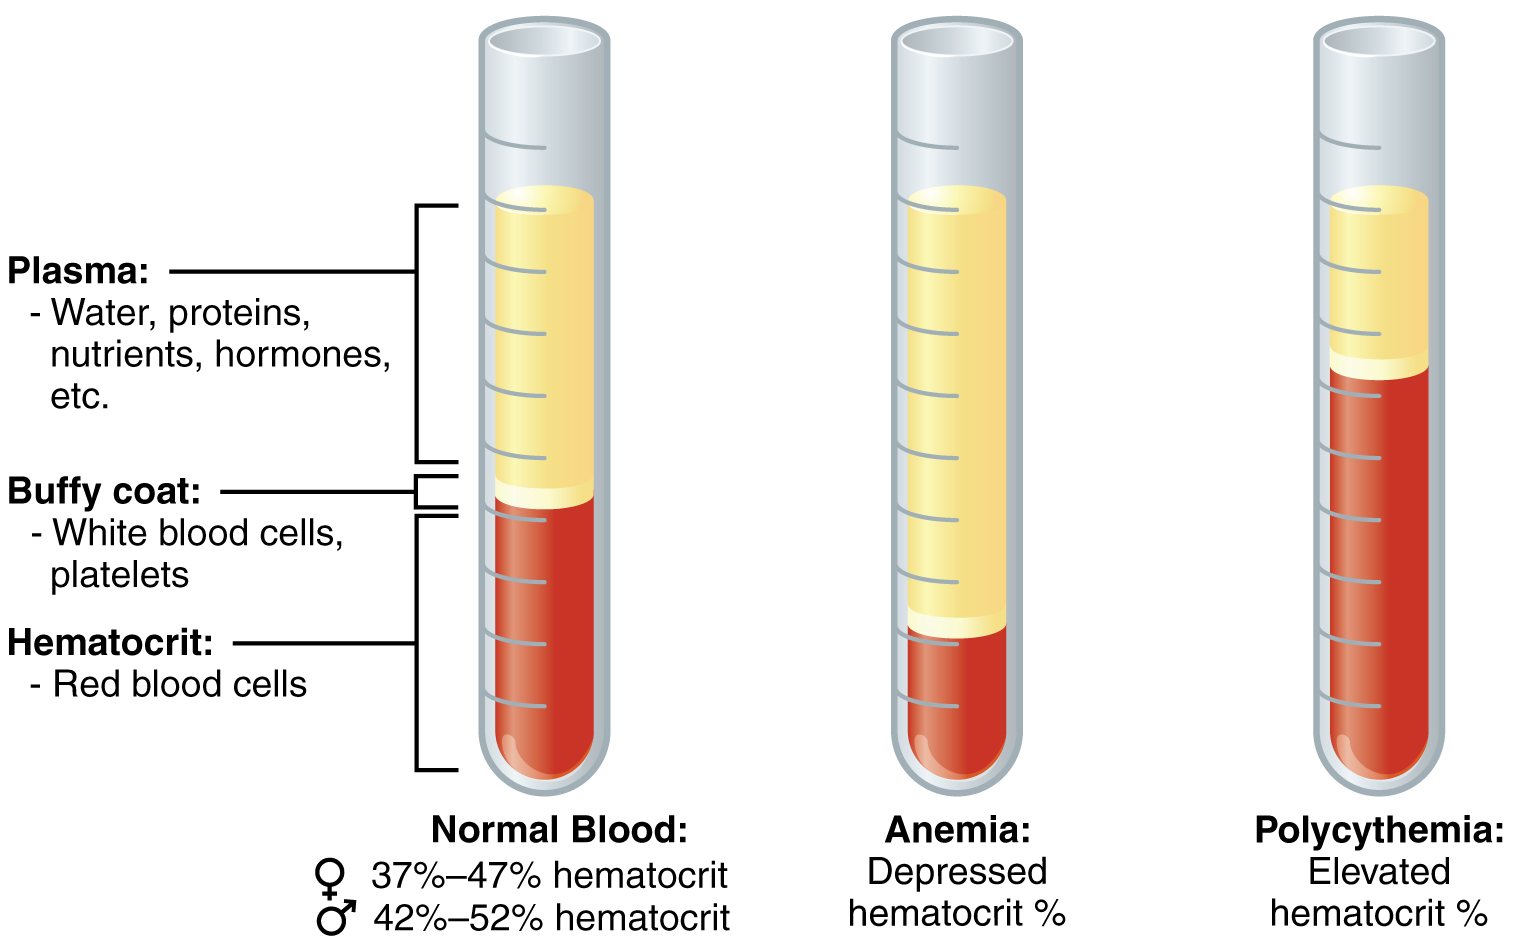 Whole blood separates by centrifugation into red blood cells comprising just under half the sample at the bottom, a thin line called the buffy coat containing the white blood cells and platelets in the middle, and the plasma comprising just over half at the top of the sample.  Also depicted are a sample with significantly fewer red blood cells than is considered normal (indicating anemia) and a sample with significantly more red blood cells than is considered normal (indicating polycythemia).